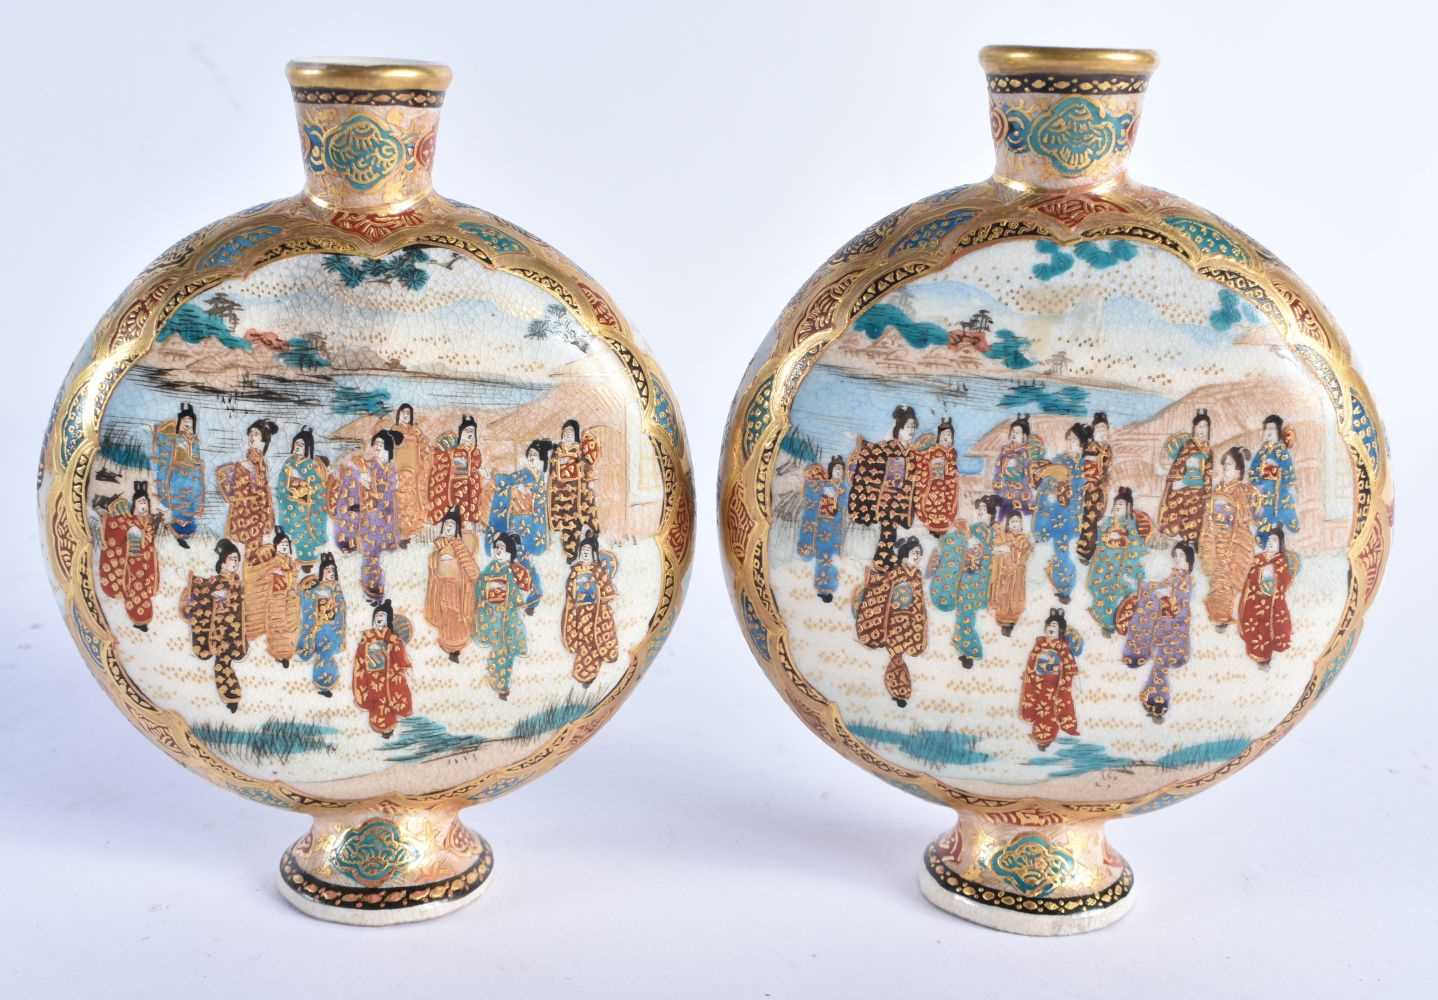 A PAIR OF 19TH CENTURY JAPANESE MEIJI PERIOD SATSUMA MOON FLASKS by Shimazu, painted with numerous